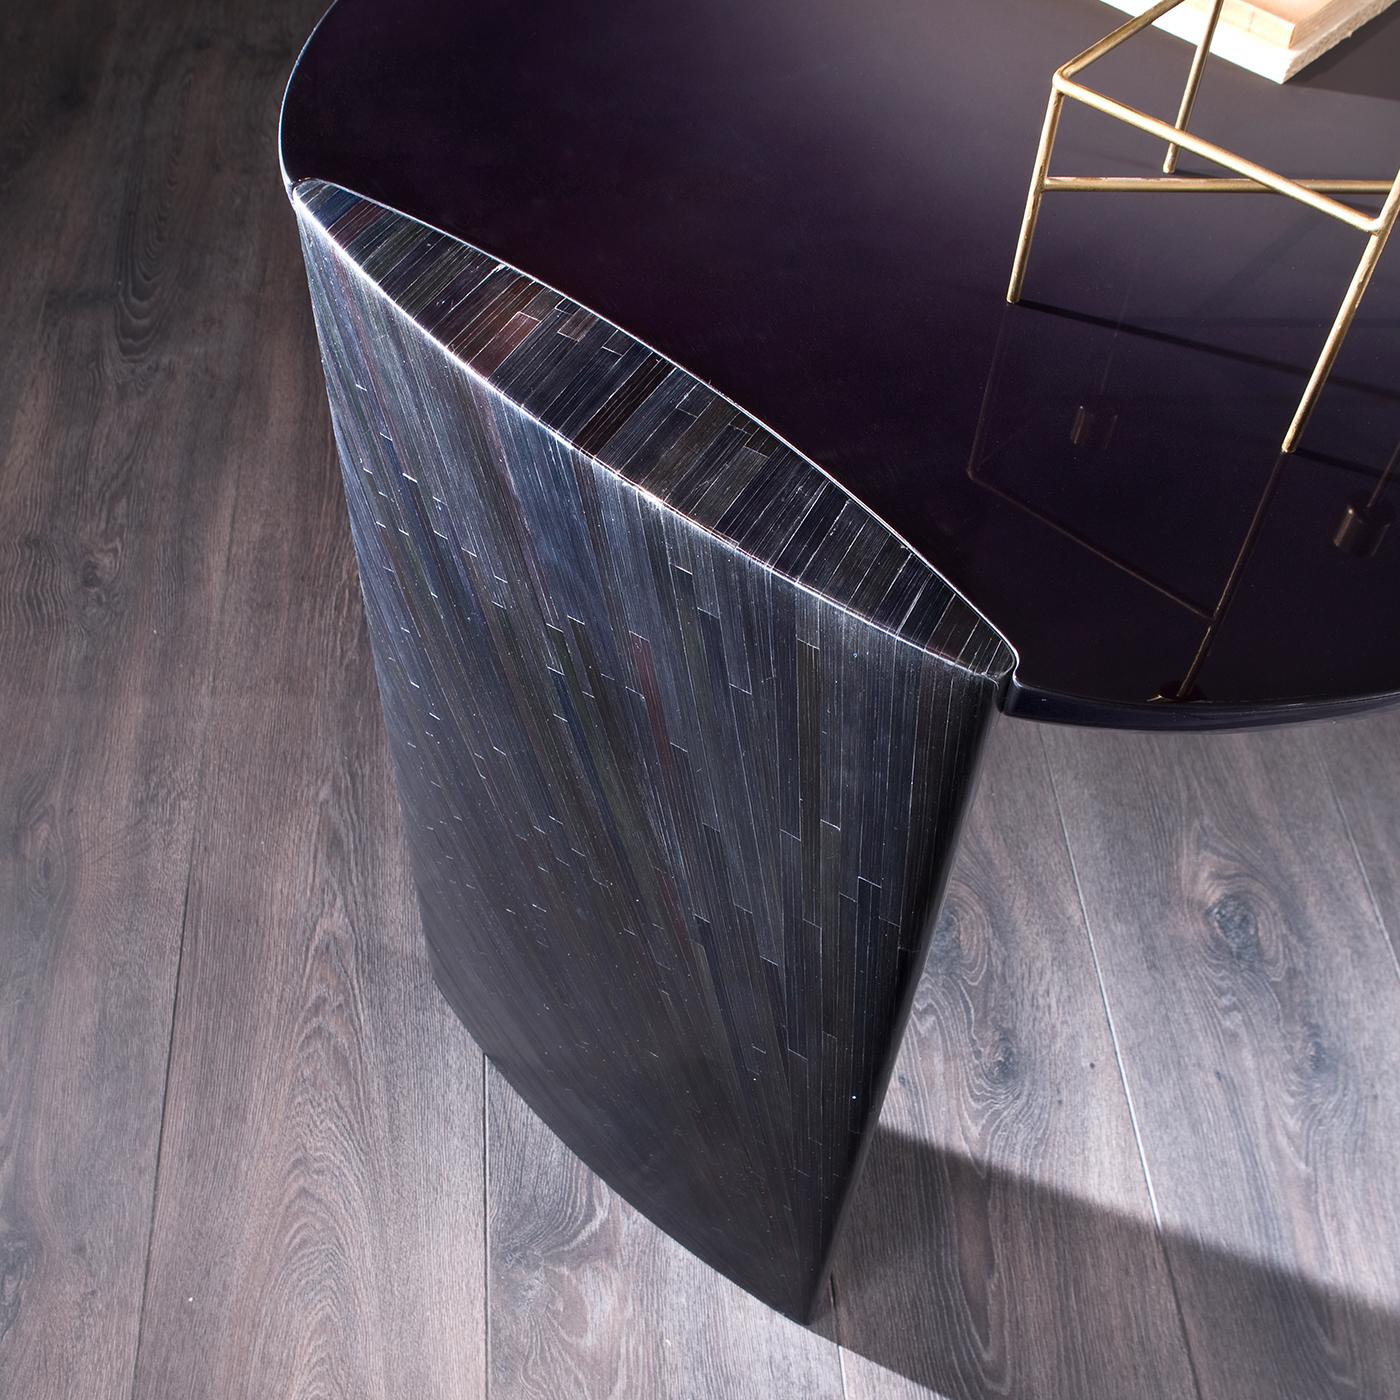 Minimal and luxurious, this round desk is the ideal decor for a modern home. Fashioned of wood with a glossy shaded lacquer, the silhouette's delicate curves of the irregular top boast a glossy shaded lacquer that strikingly contrasts with the